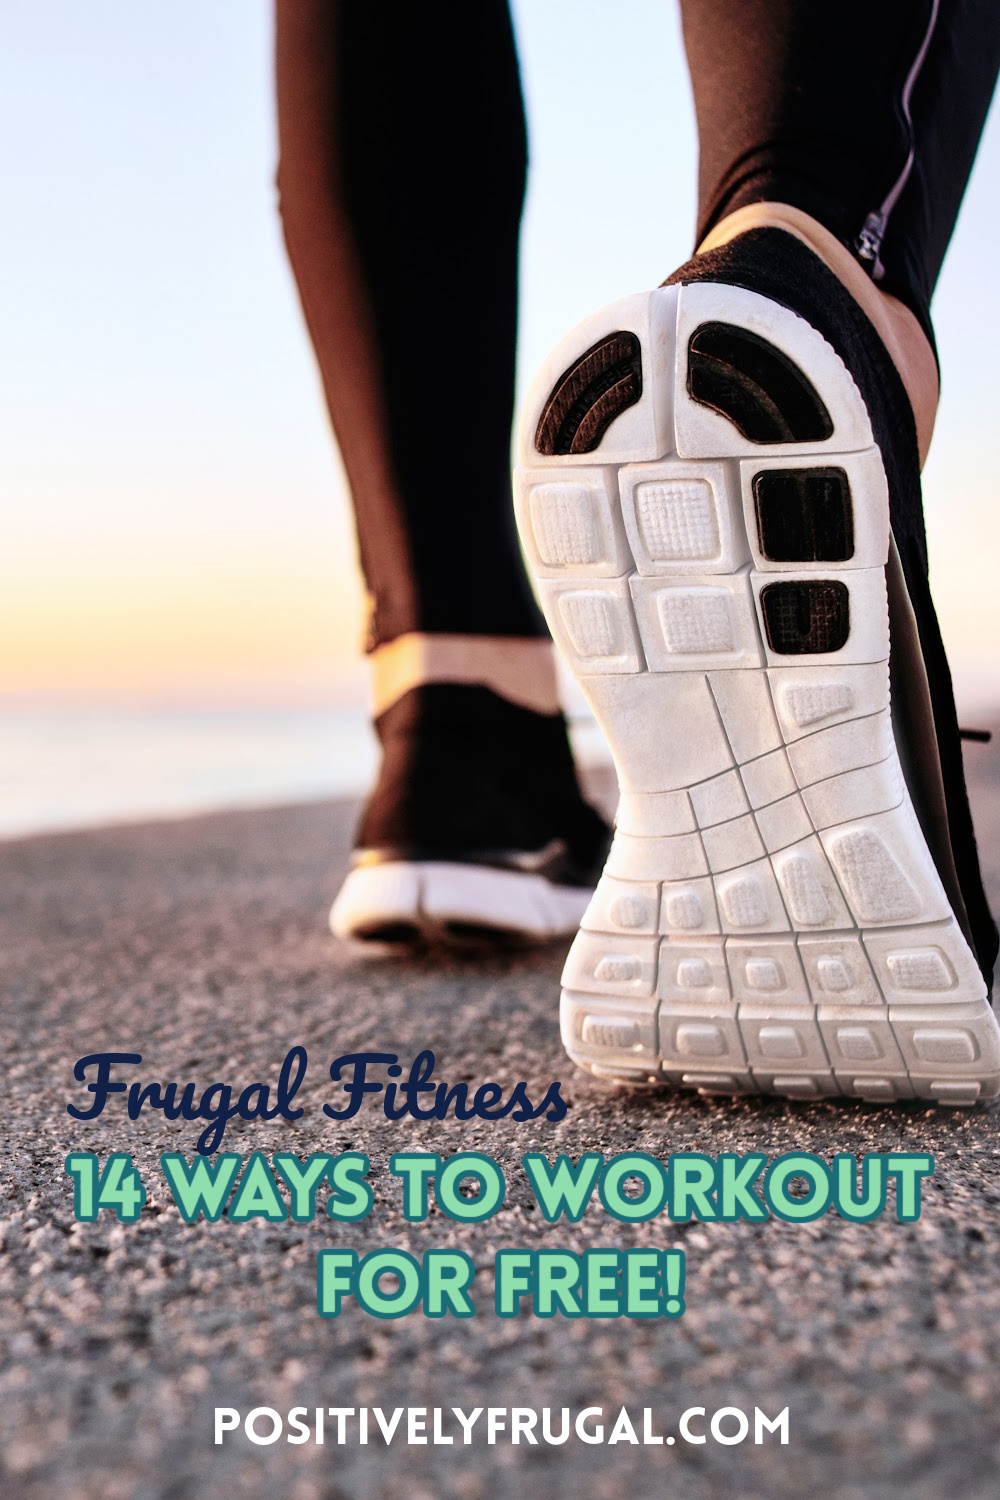 Frugal Fitness 14 Ways To Workout for Free by PositivelyFrugal.com